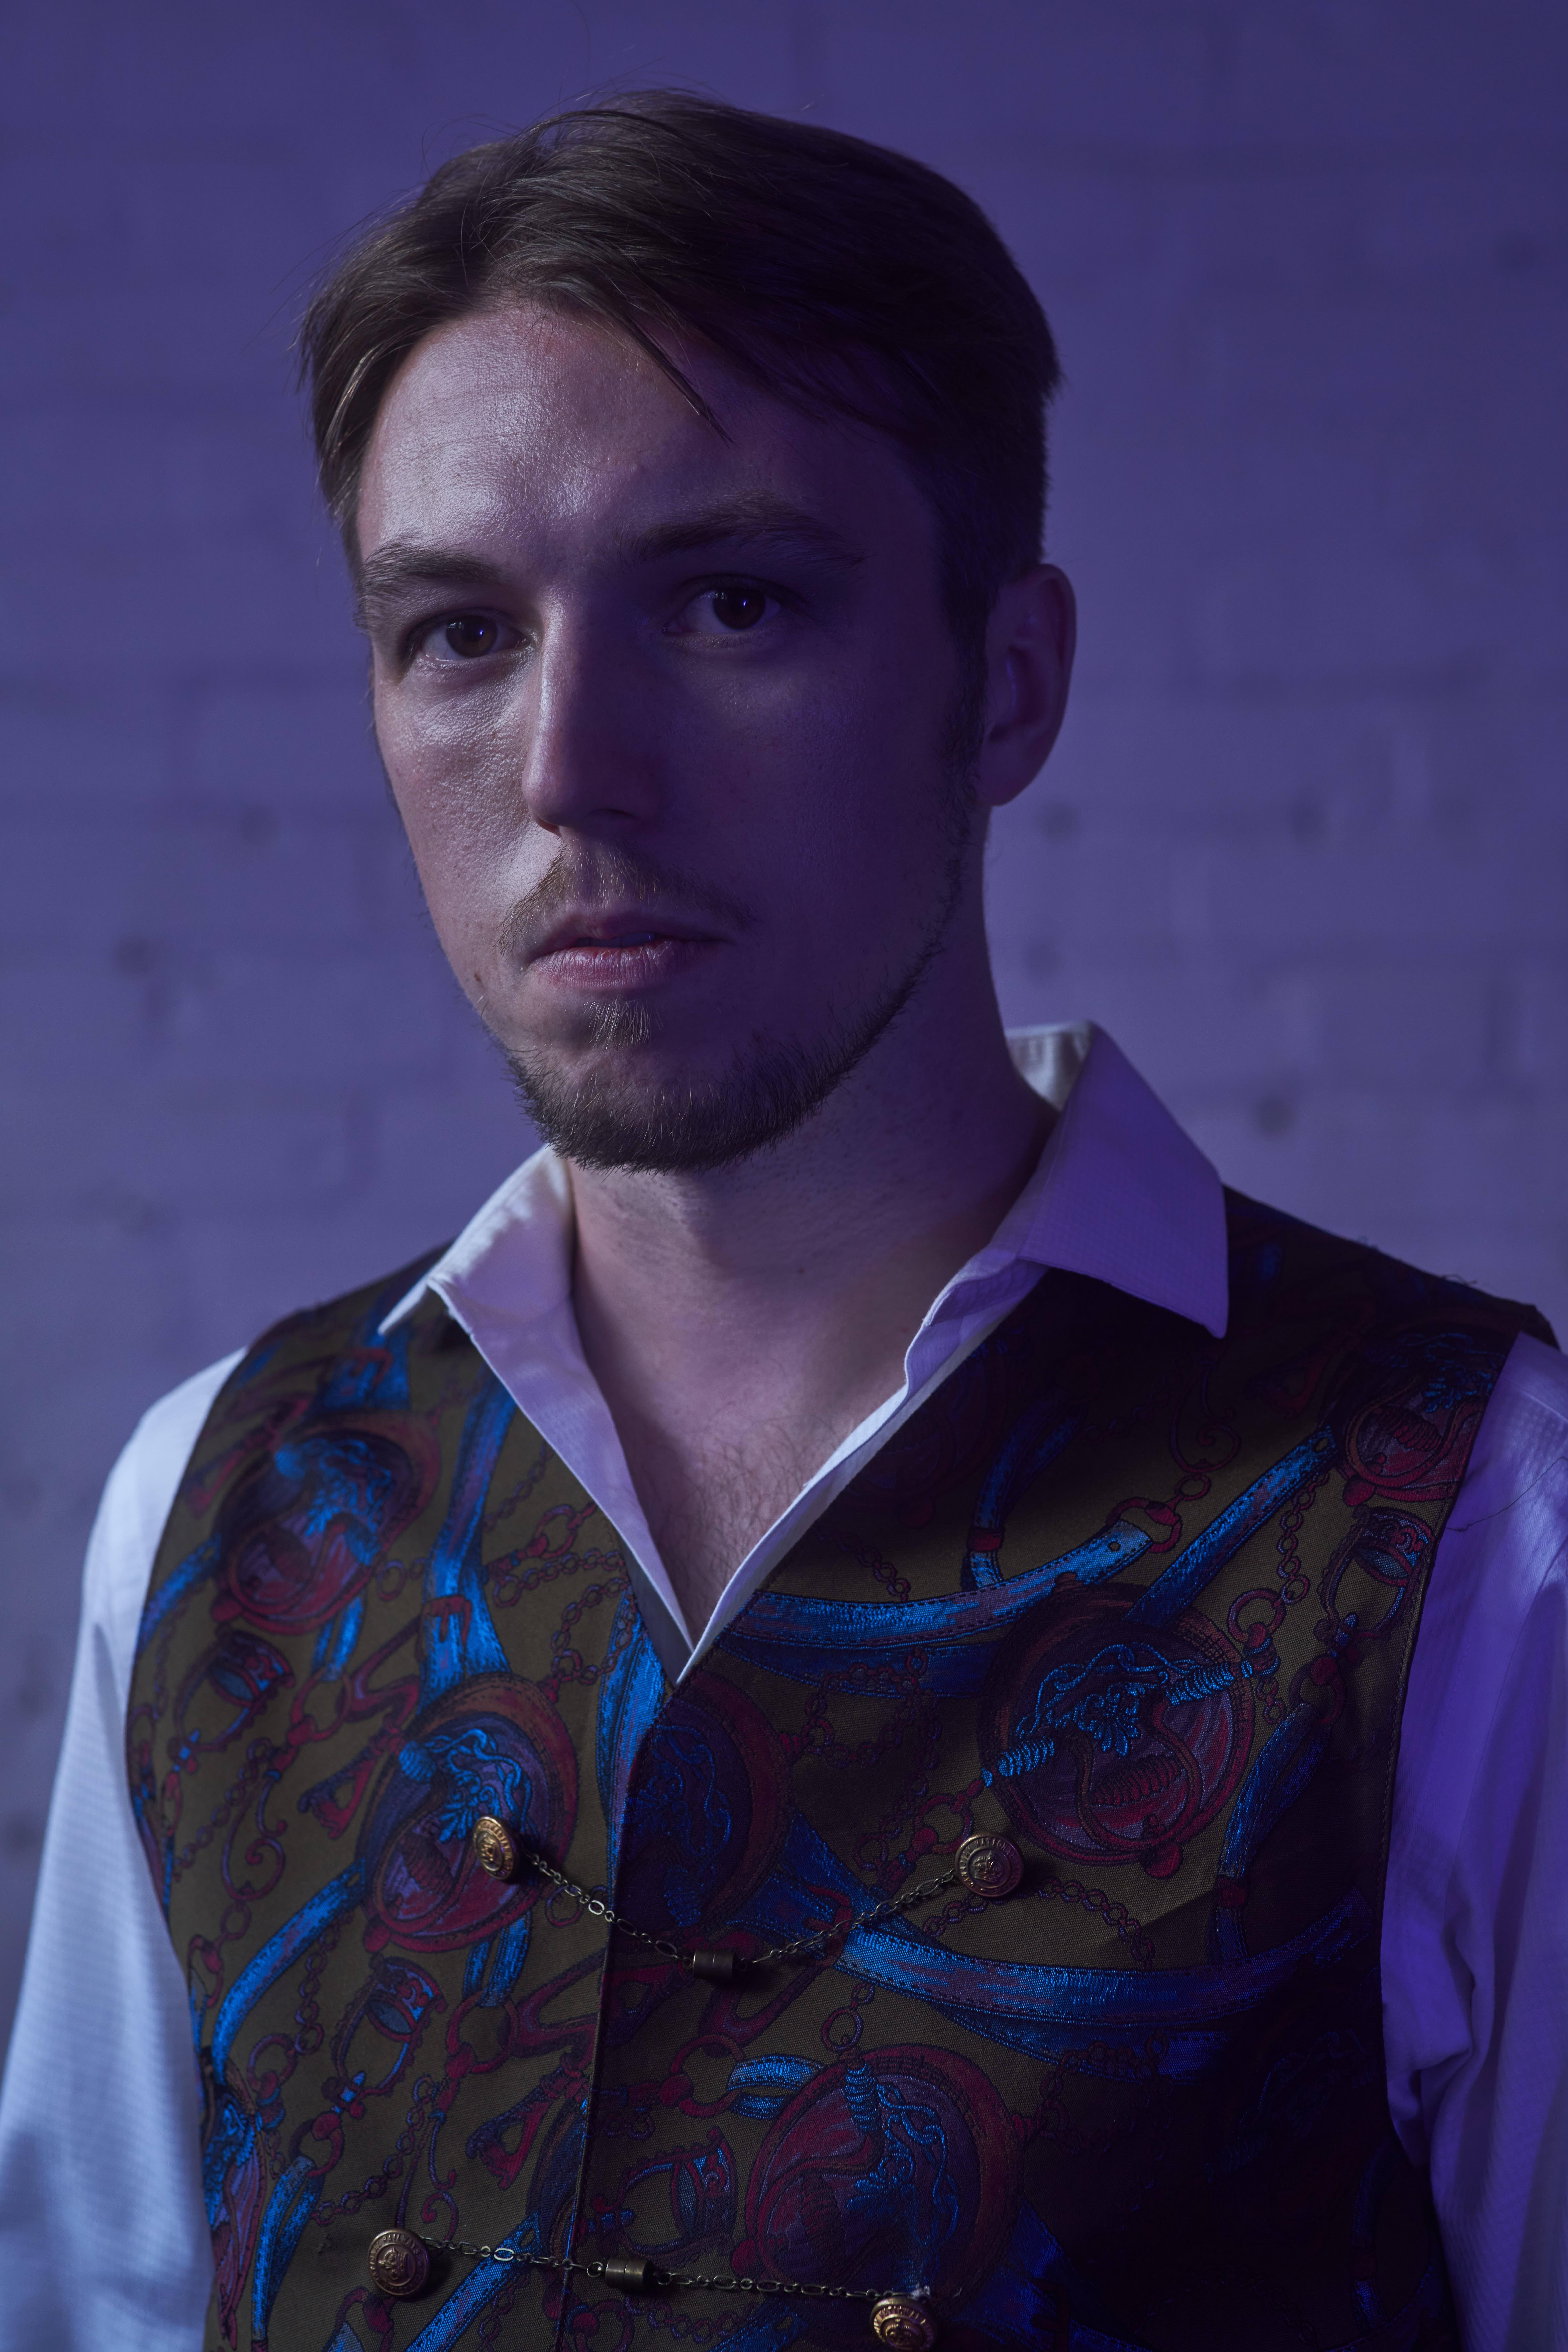 A colour photo of Tristan Zaba, standing in front of a white brick wall. The image has a purple tint to it.